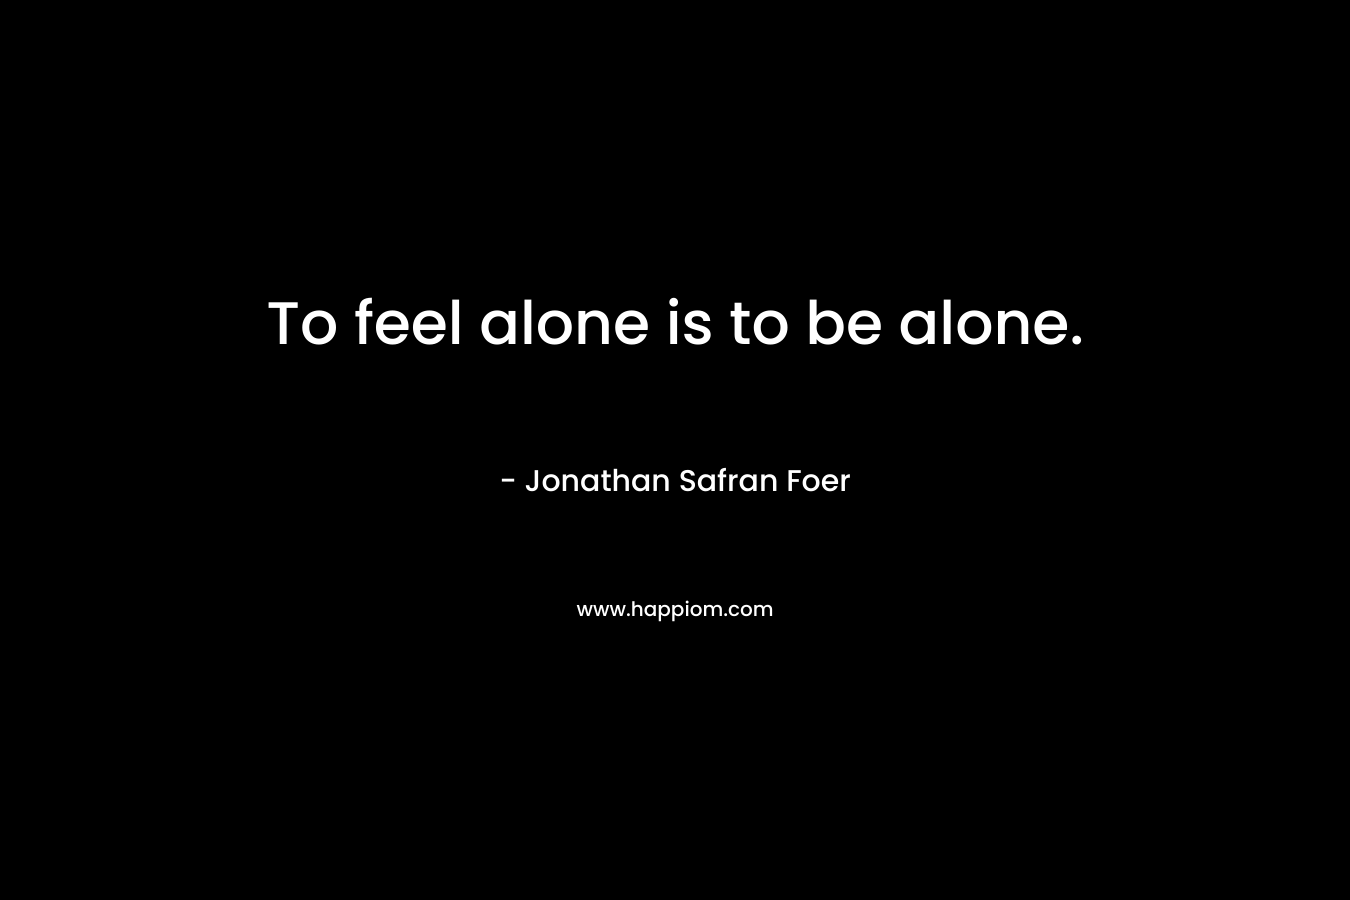 To feel alone is to be alone.